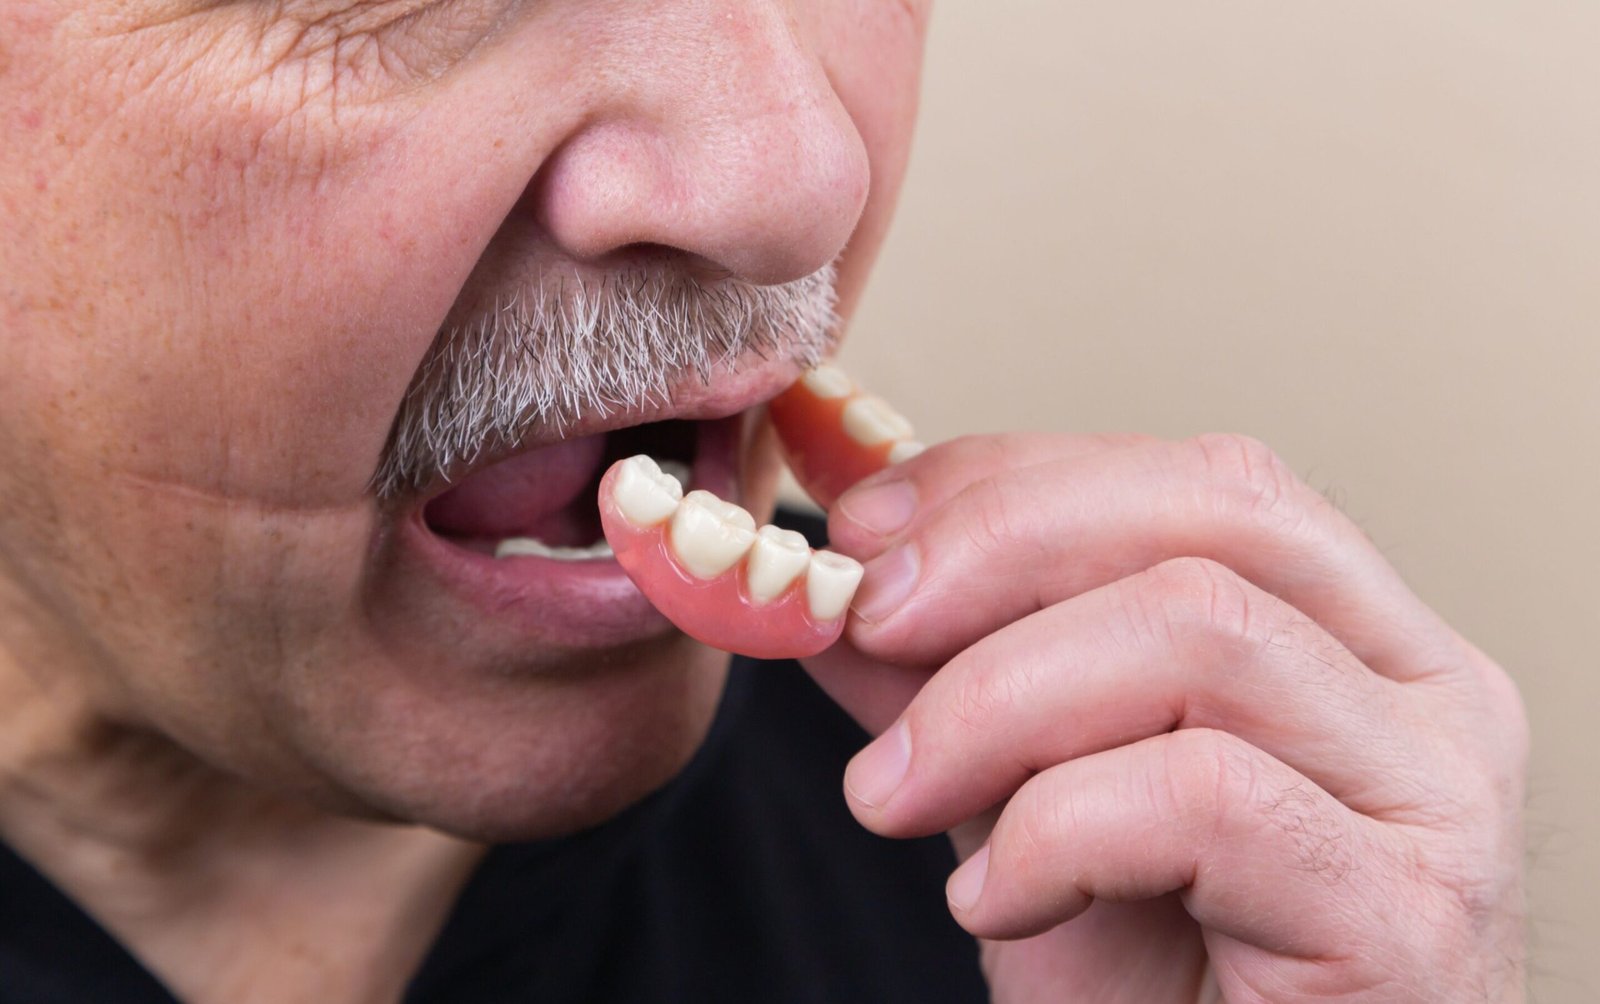 Laboratory model enables researchers to explore the mouths response to oral disease